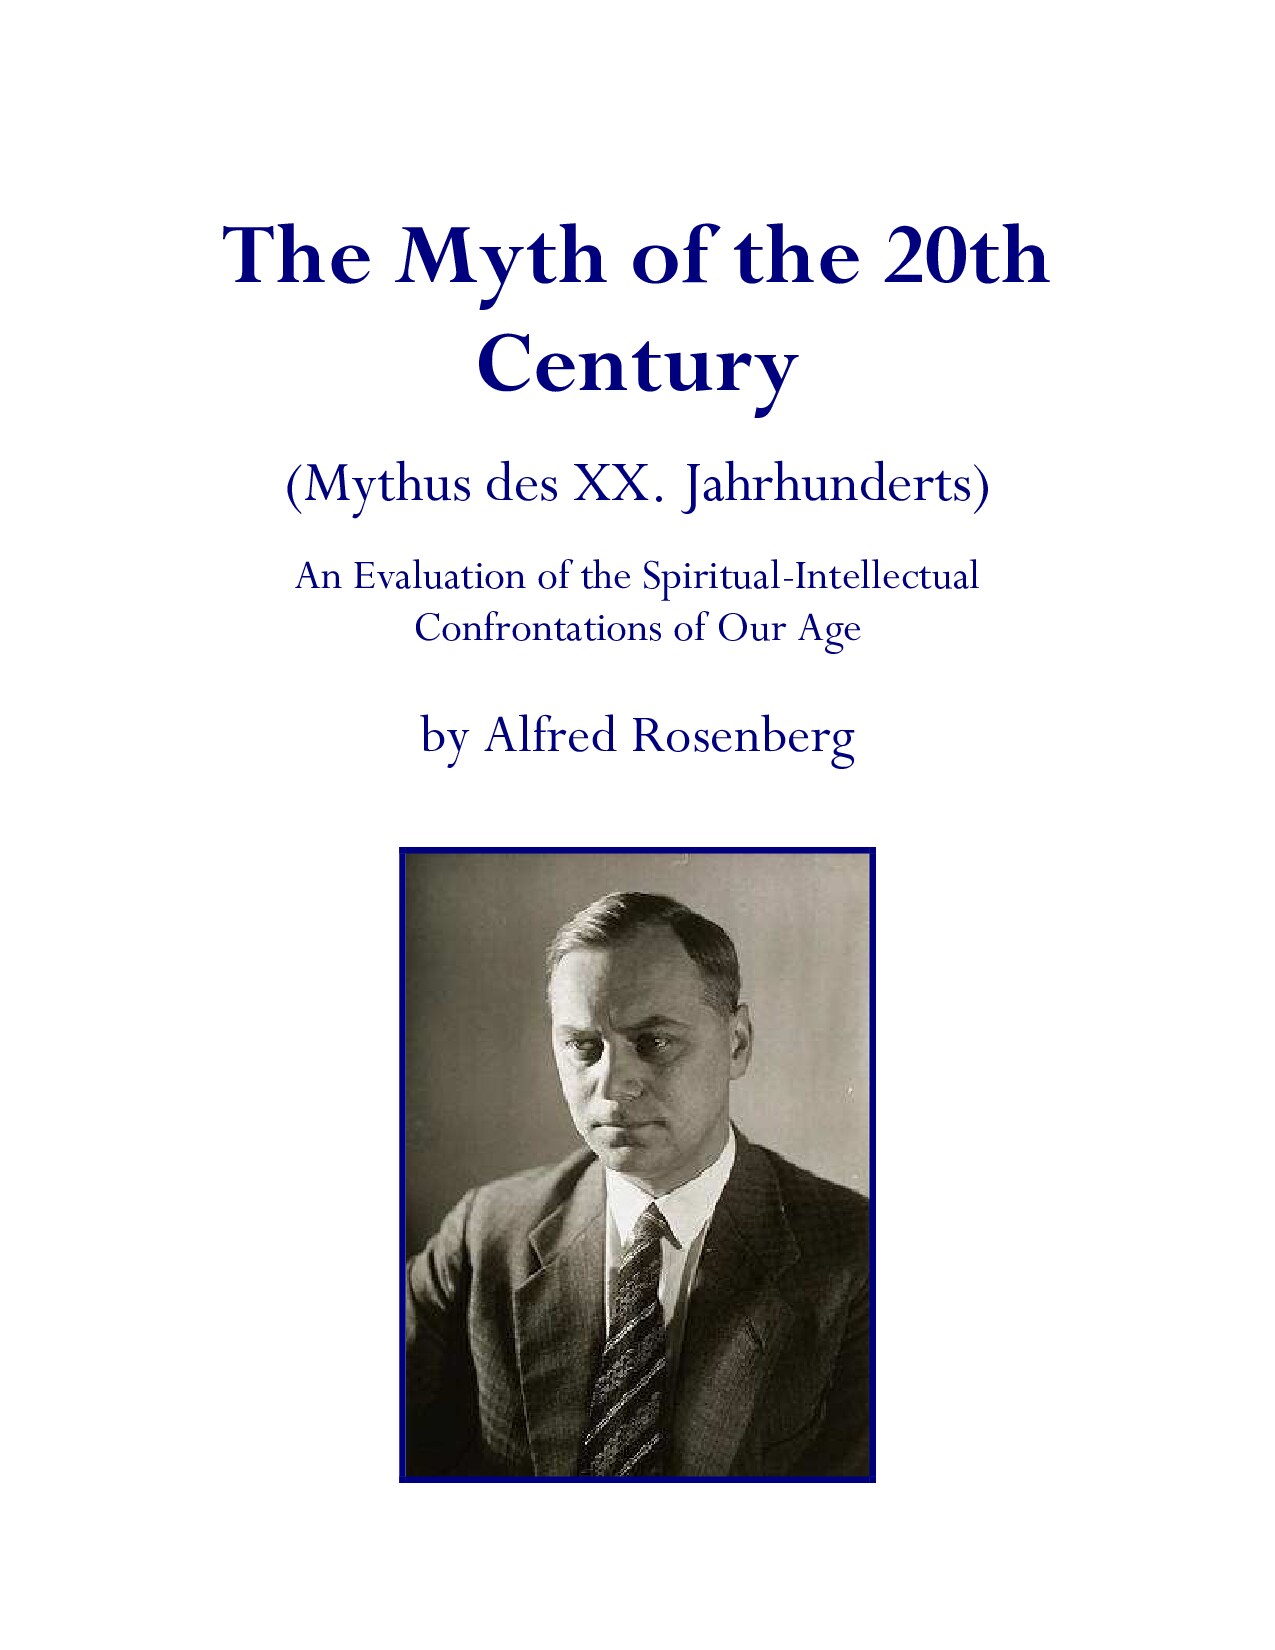 Rosenberg, Alfred; The Myth of the 20th Century; An Evaluation of the Spiritual-Intellectual Confrontations of Our Age